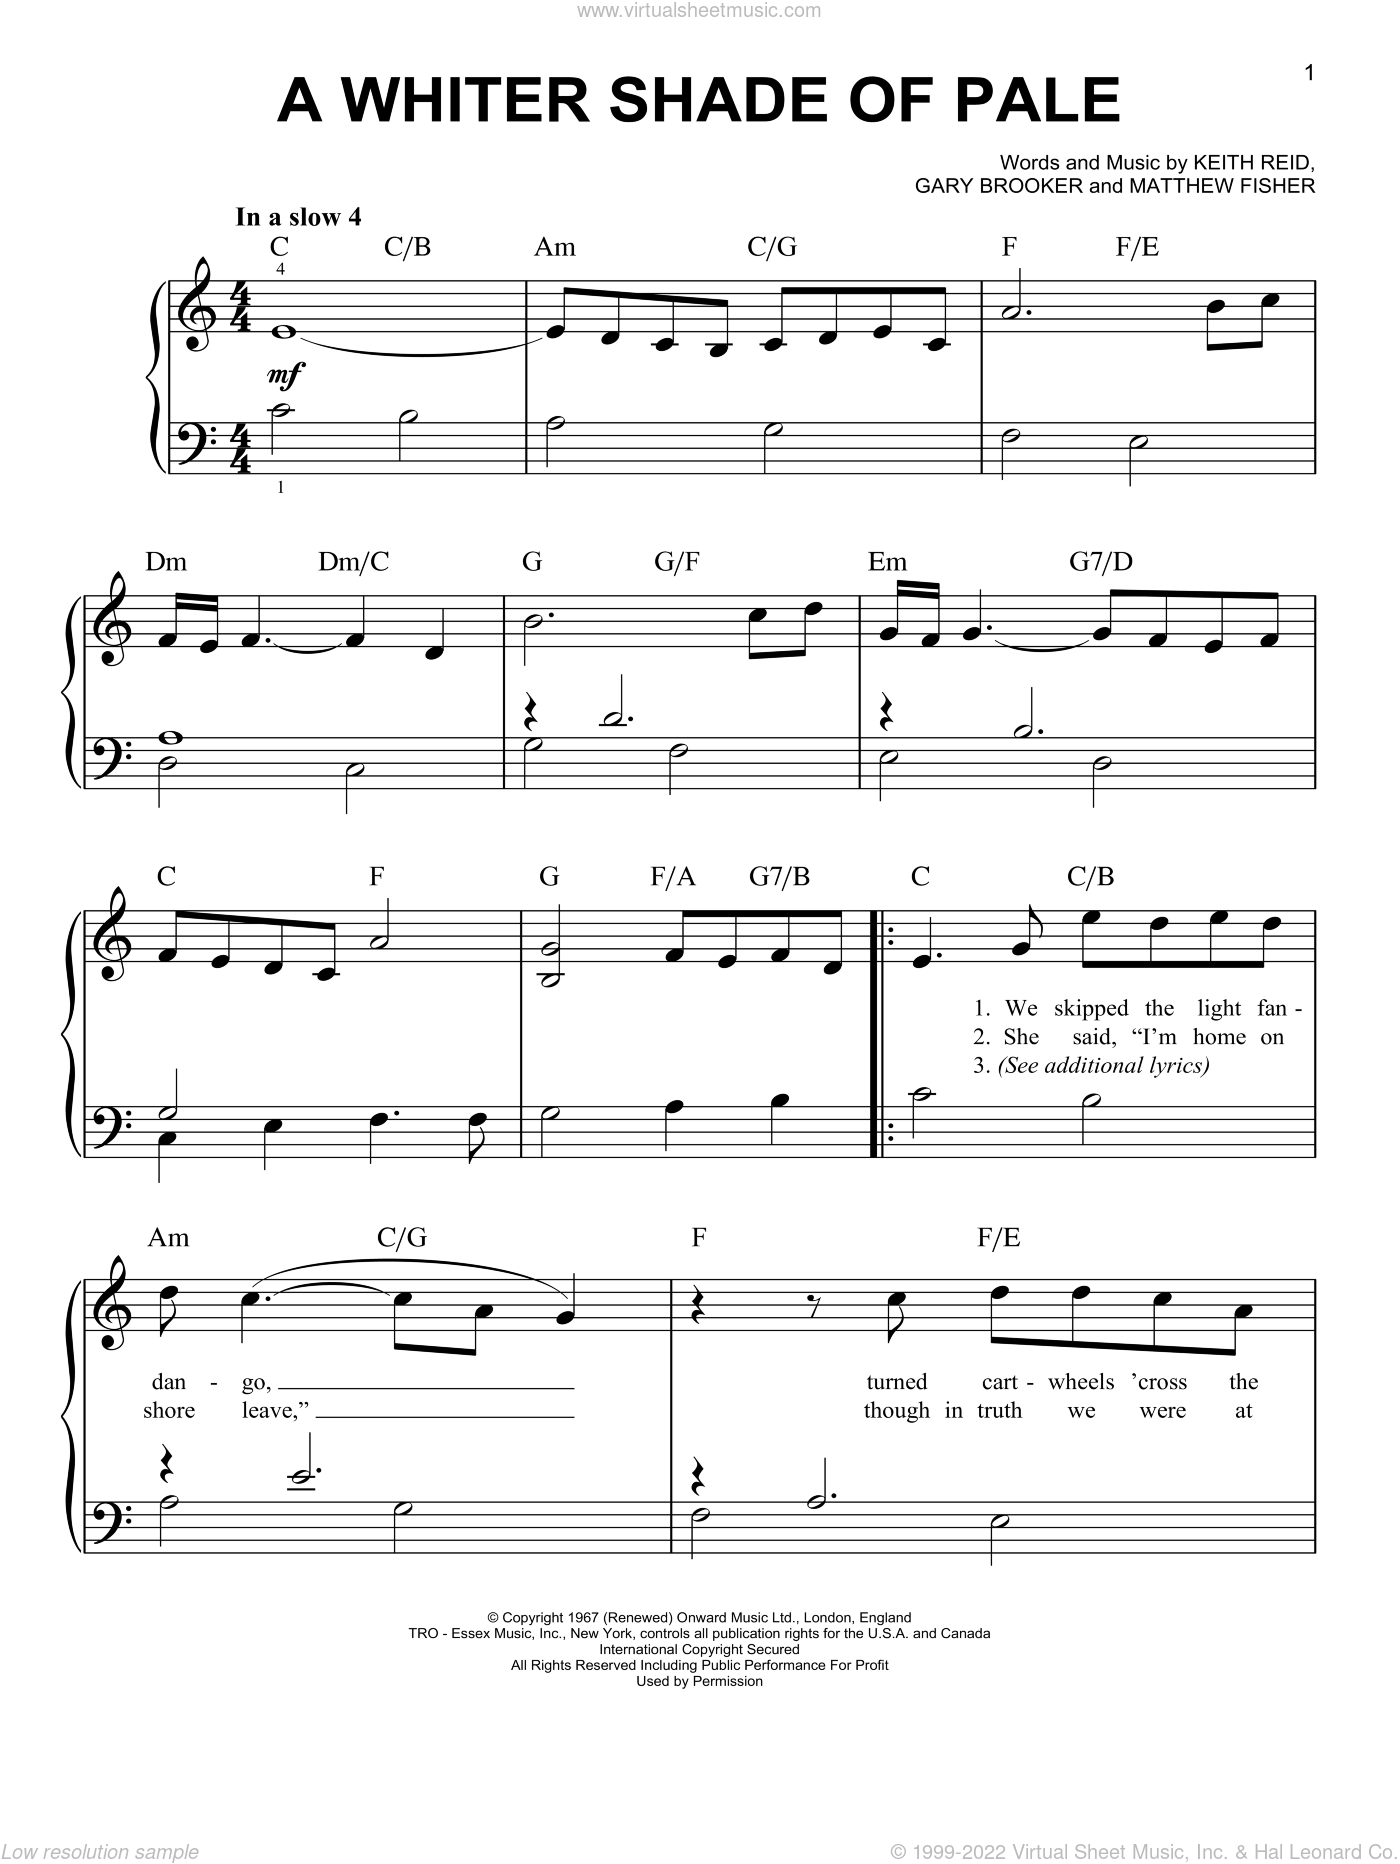 Harum - A Whiter Shade Of Pale, (beginner) sheet music for piano solo